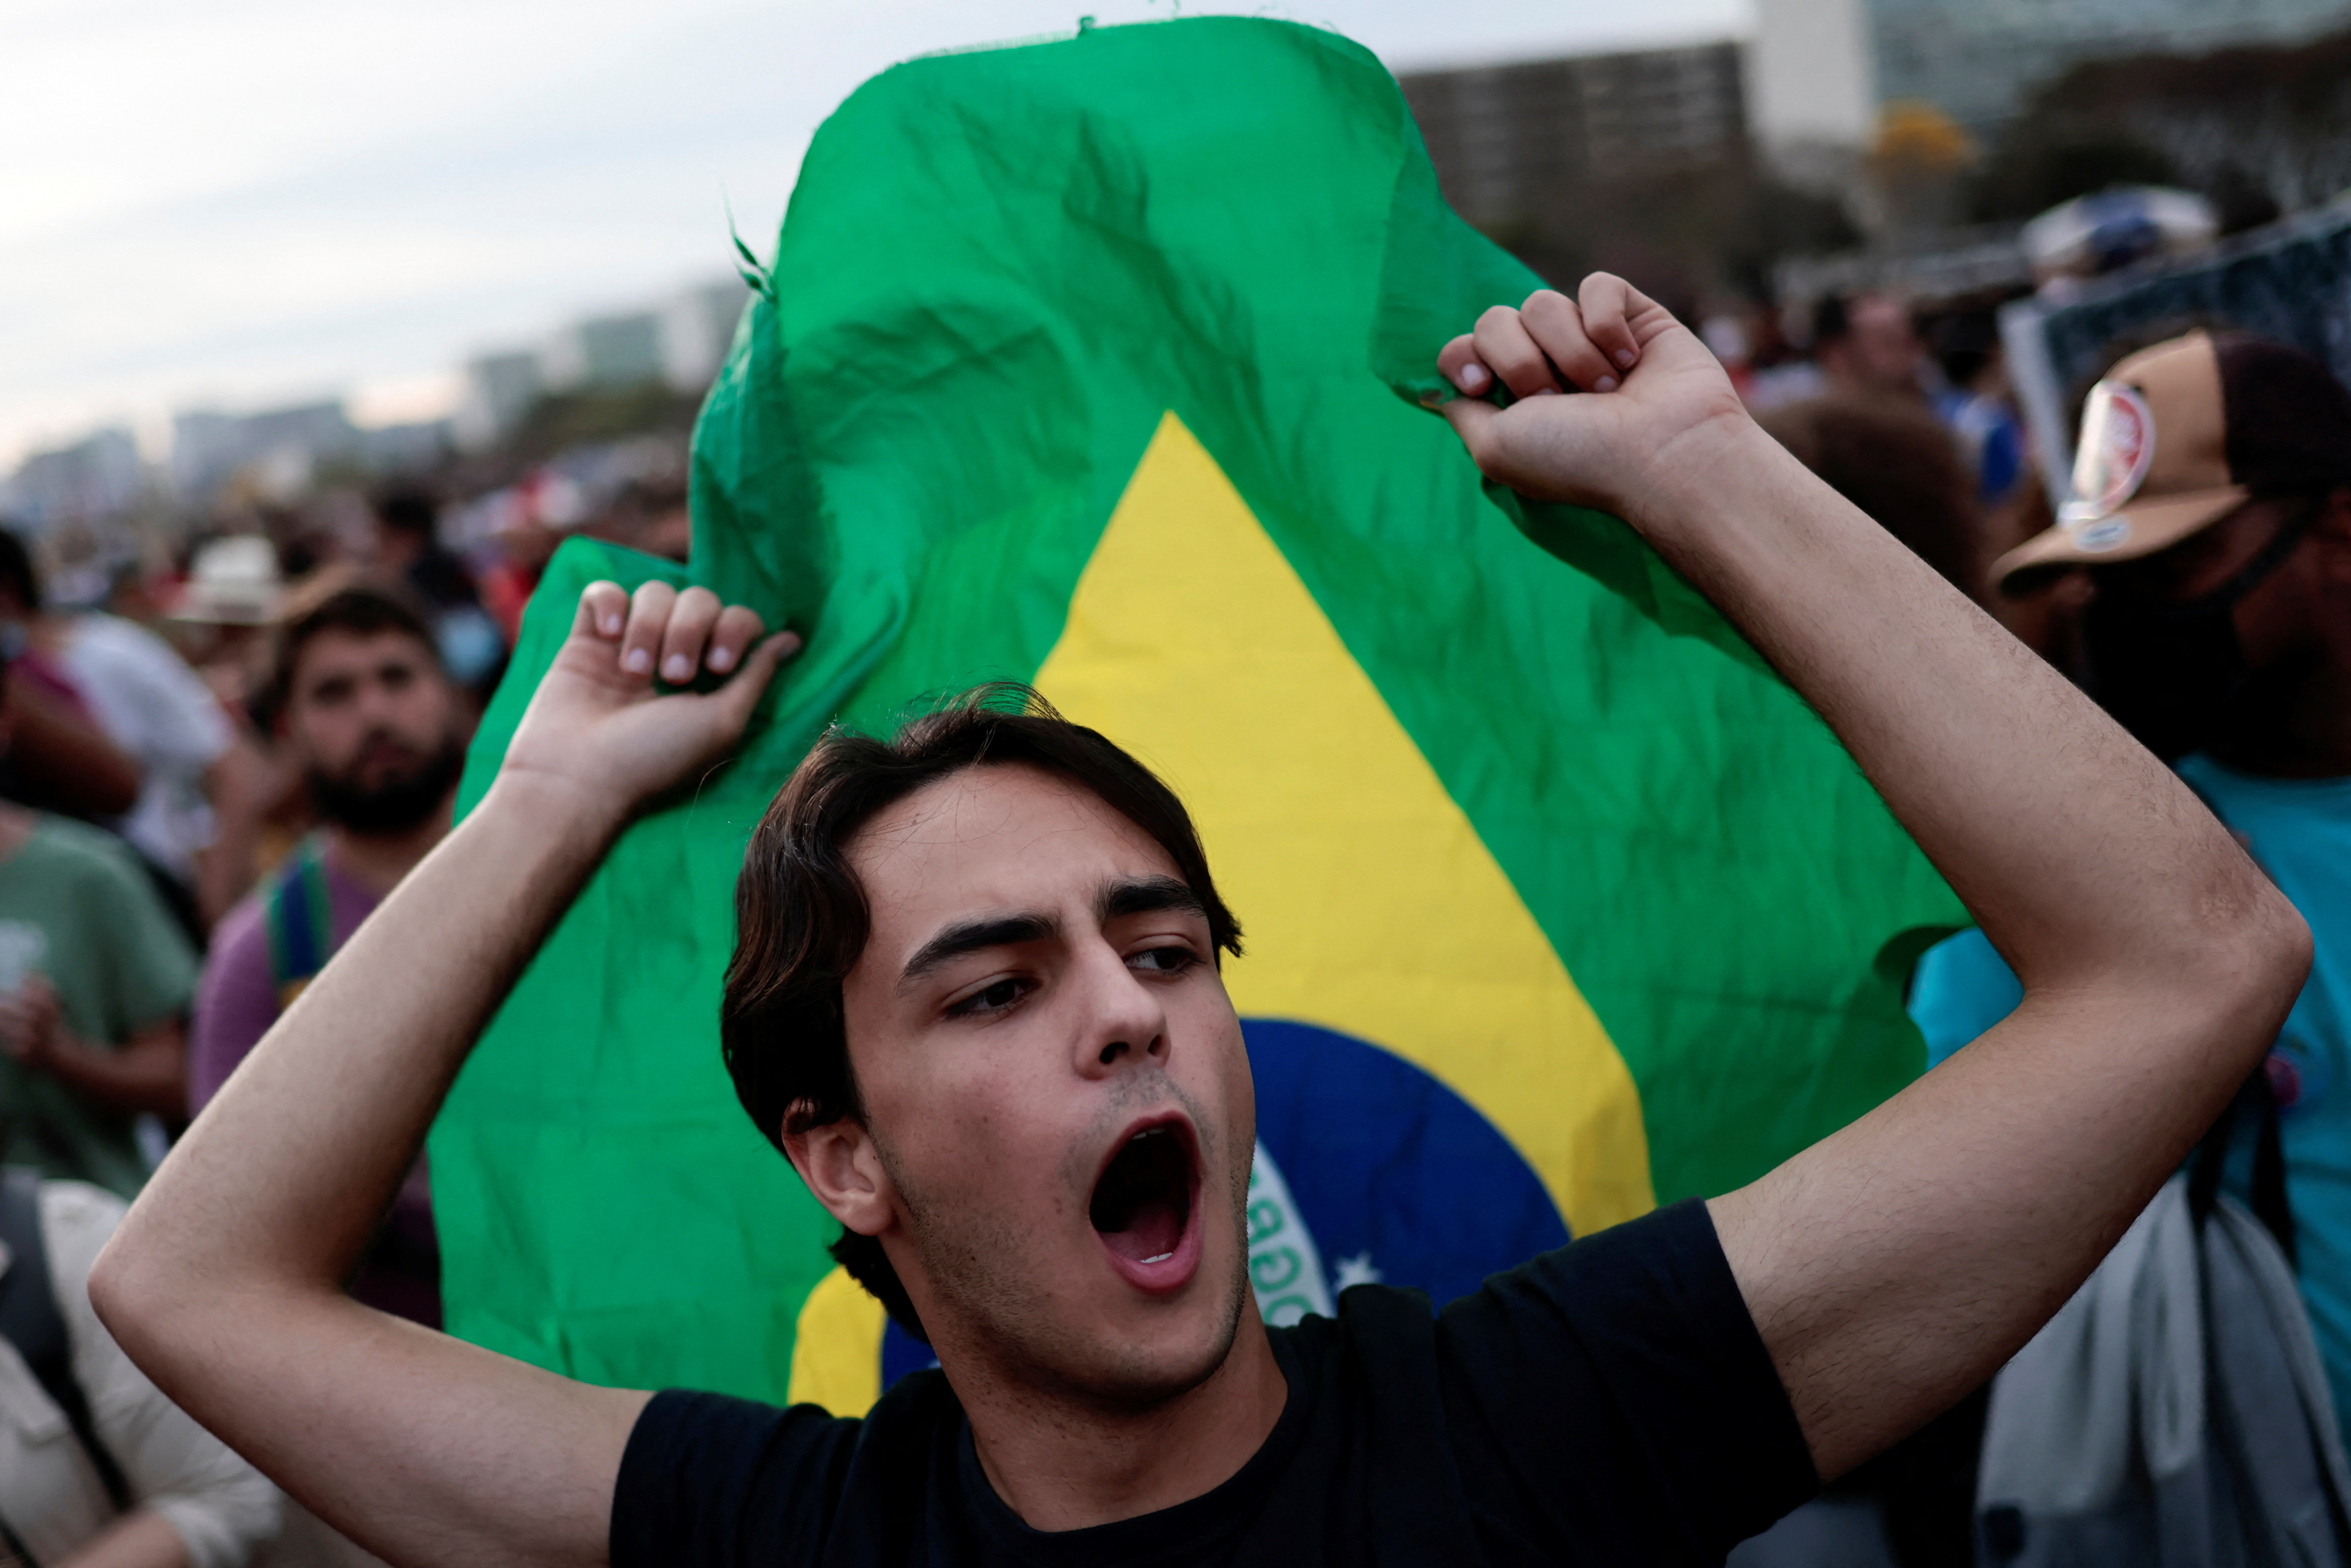 March in support of manifestos defending the nation's democratic institutions and electronic voting system, in Brasilia